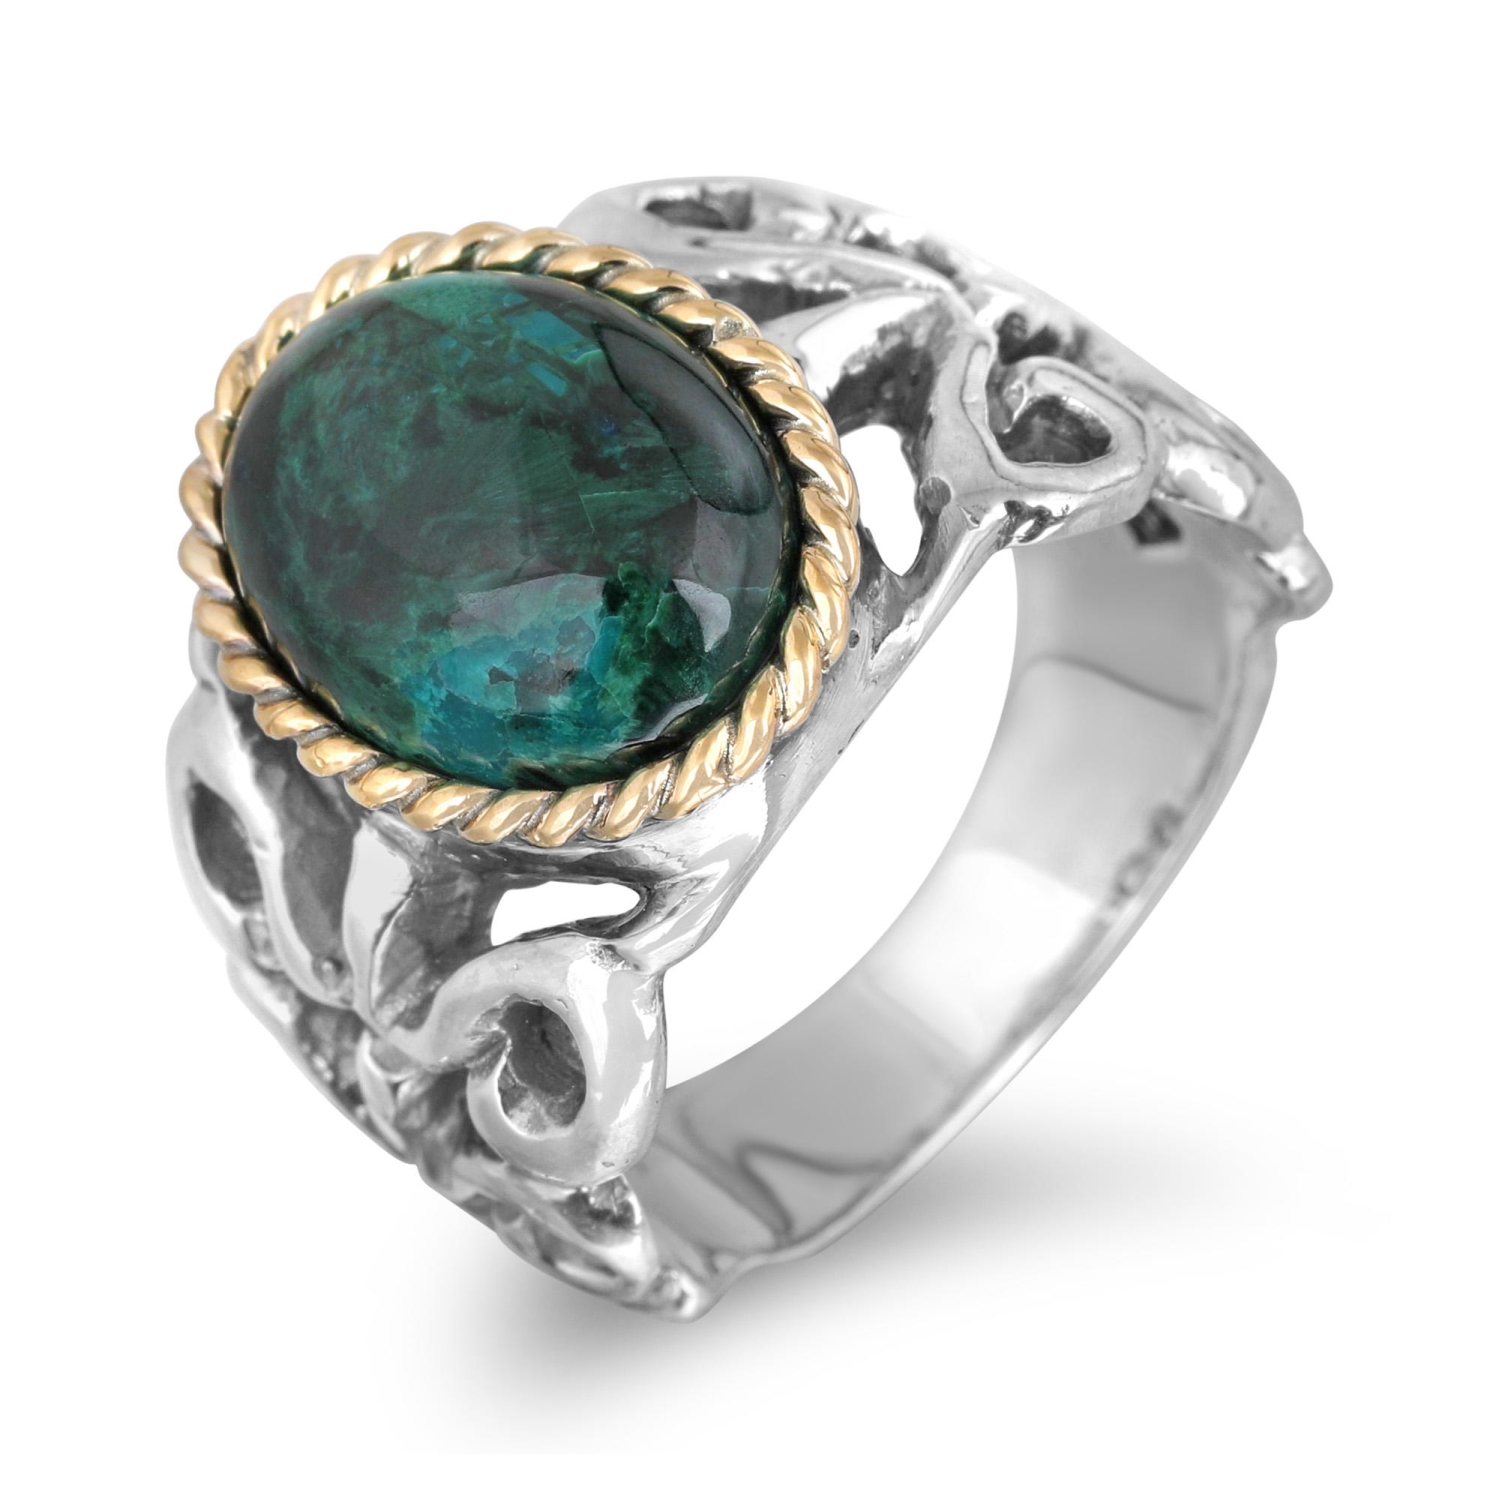 Sterling Silver and Eilat Stone Filigree Ring with 9k Gold Accent - 1